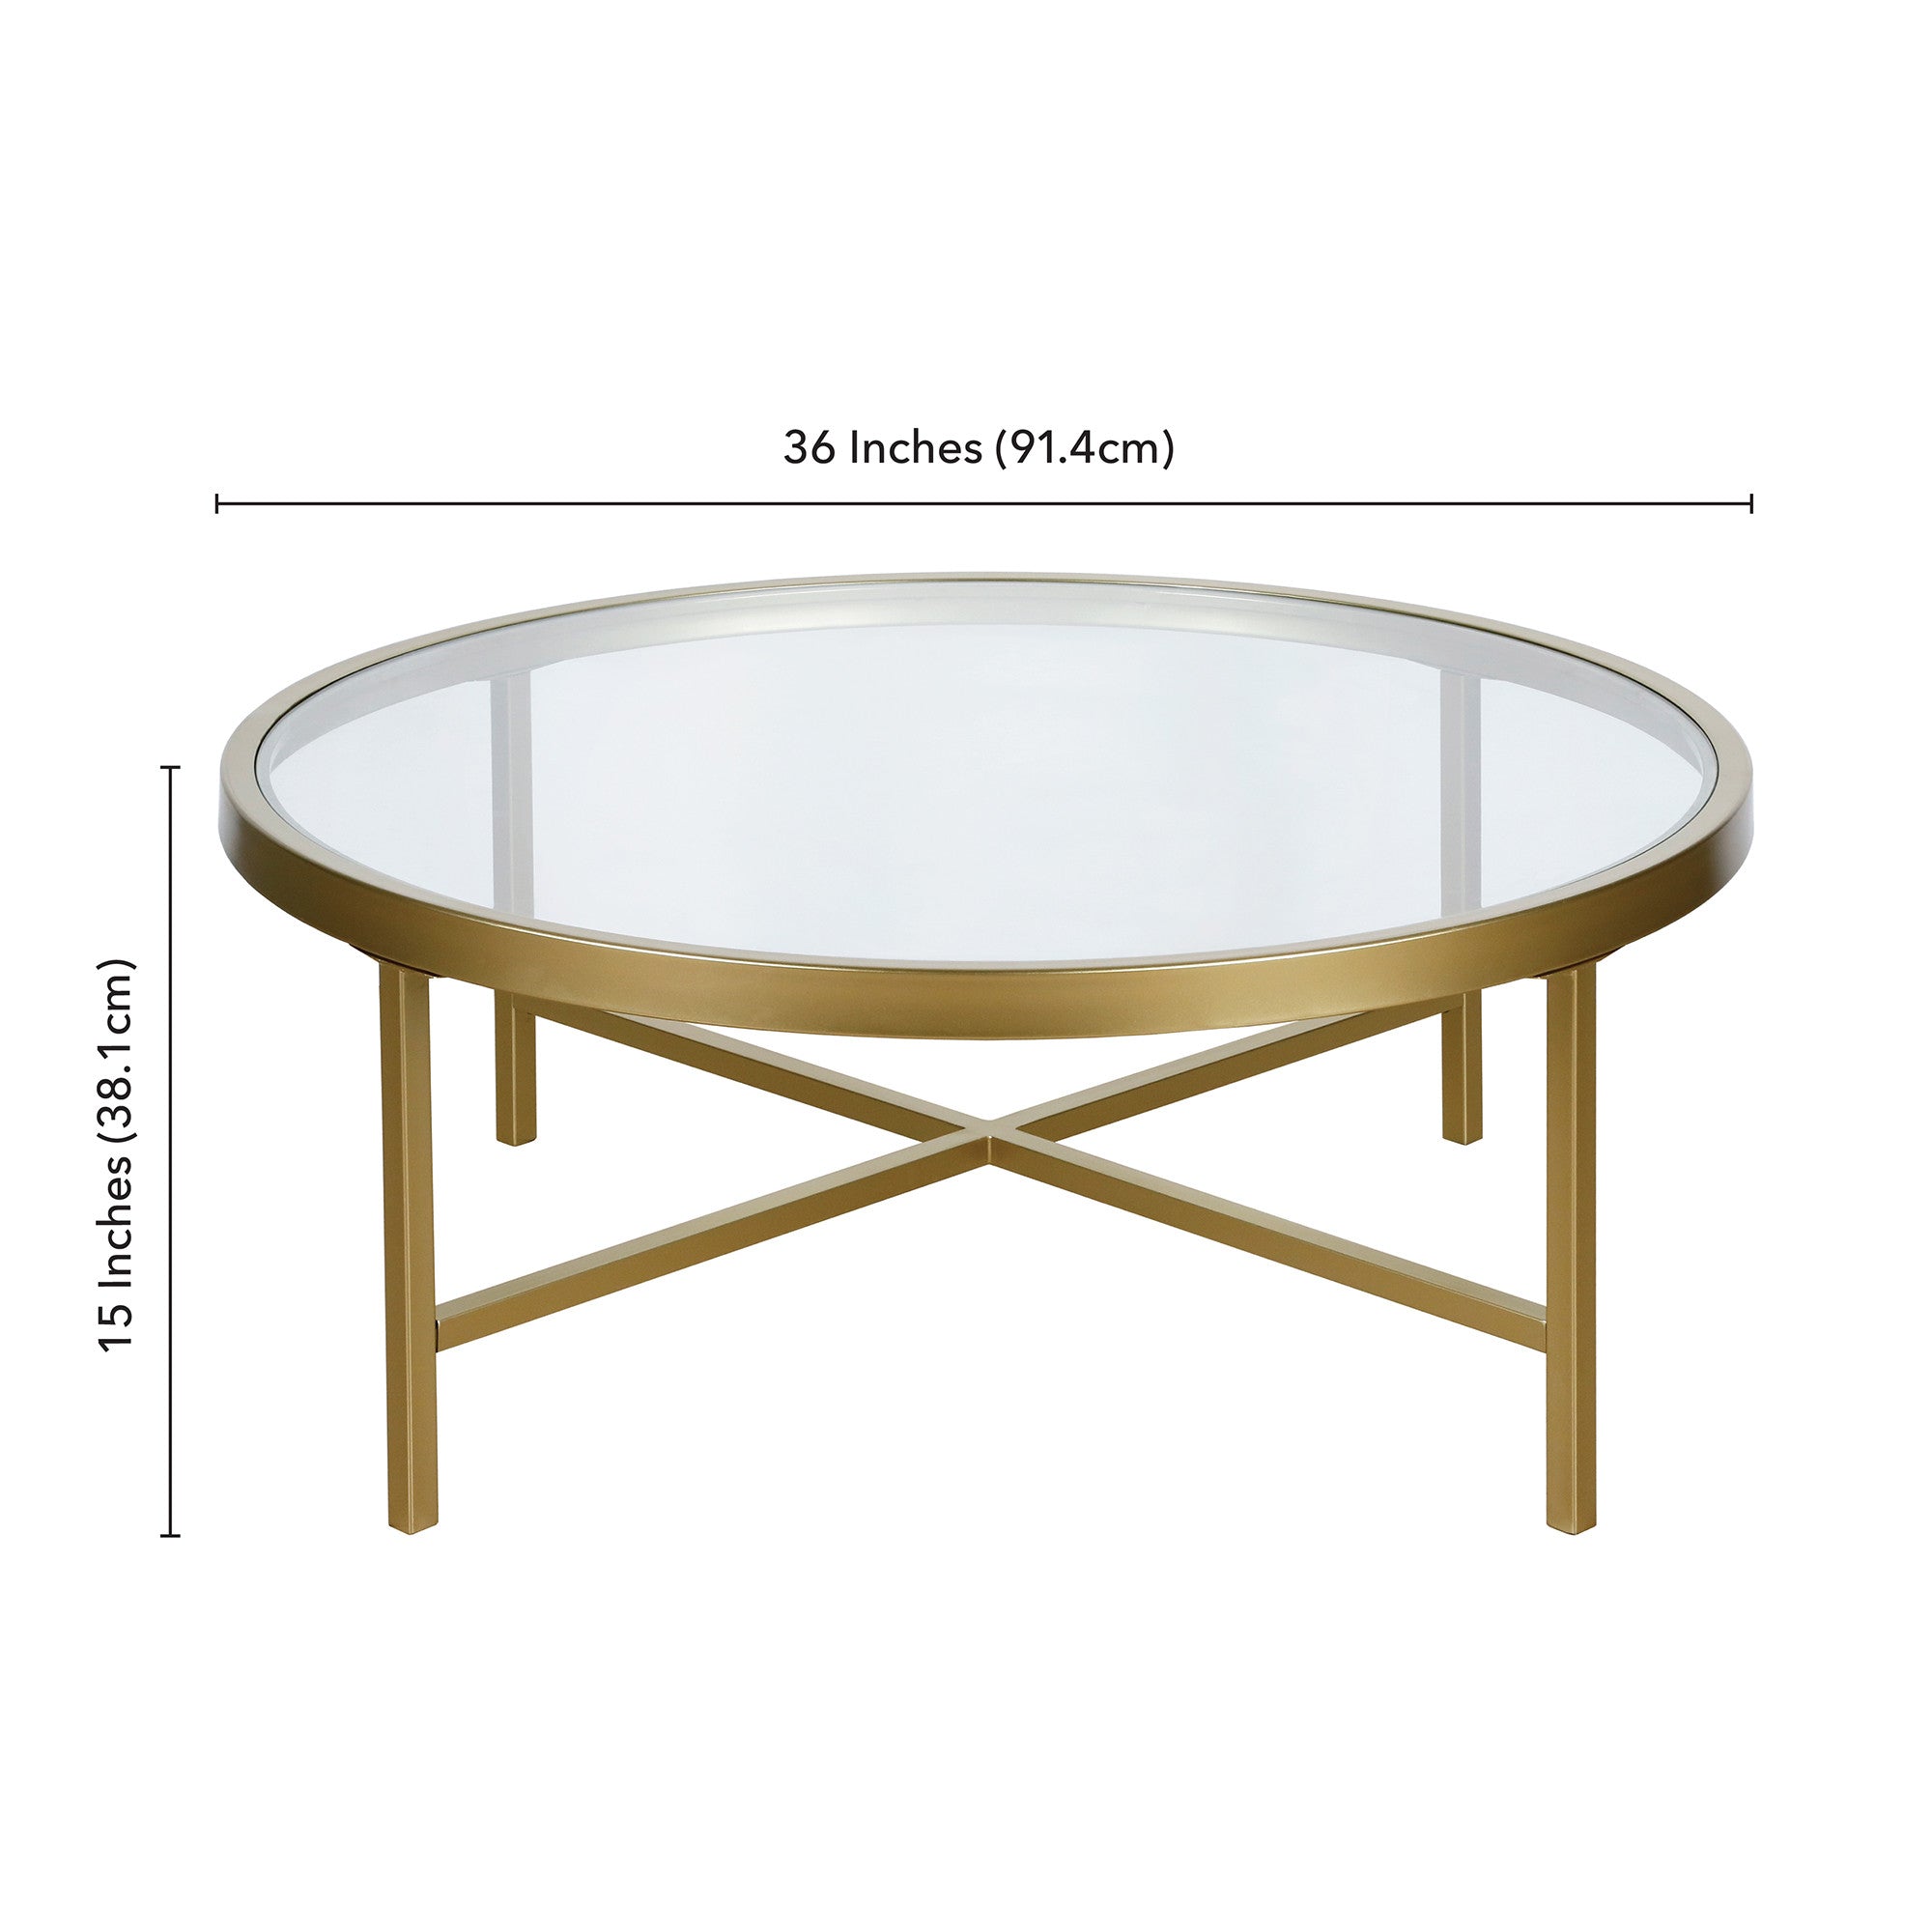 36" Gold Glass And Steel Round Coffee Table